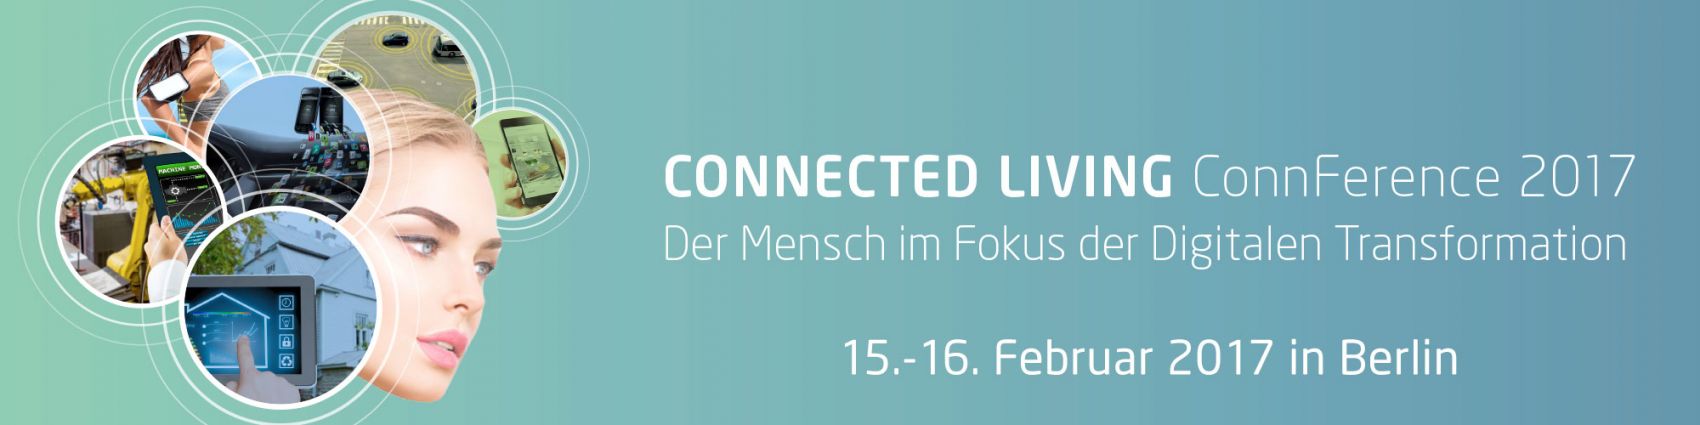 3. Connected Living ConnFerence